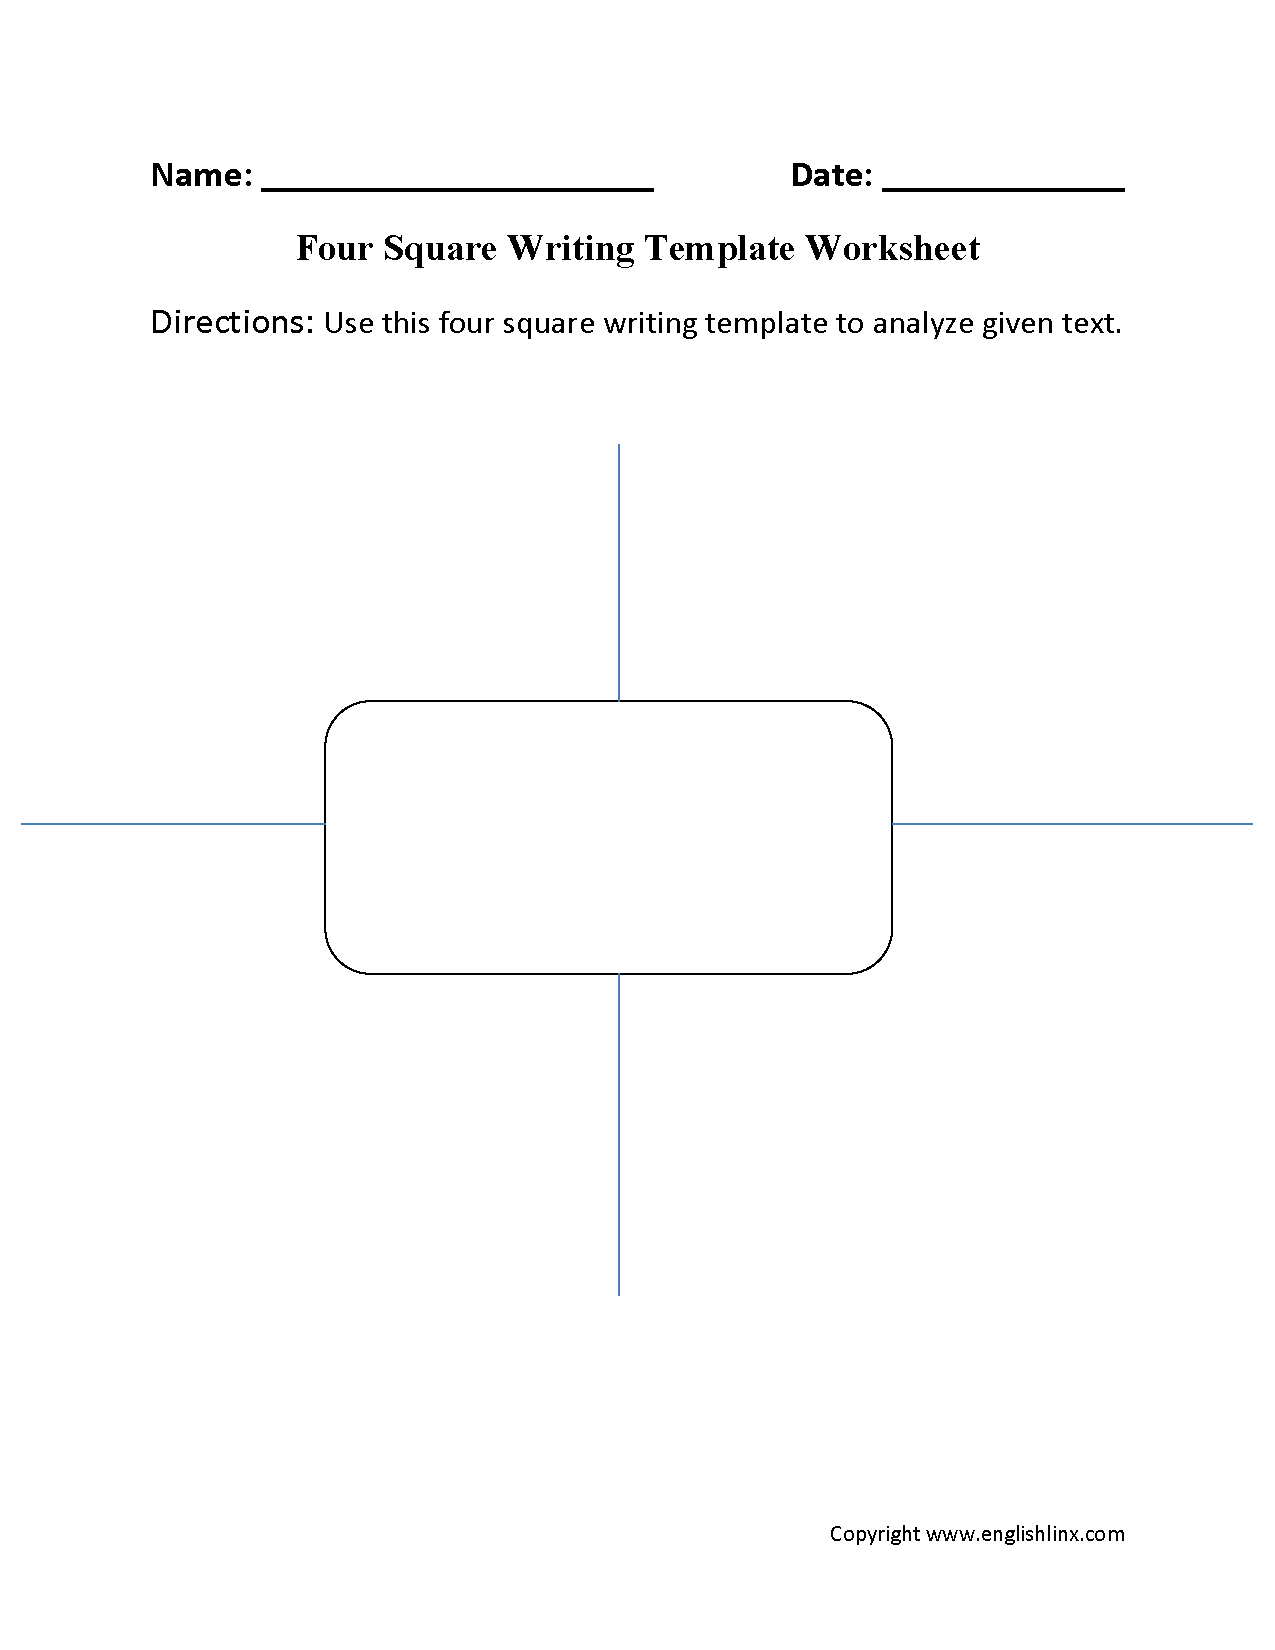 Writing Worksheets | Writing Template Worksheets With Regard To Blank Four Square Writing Template